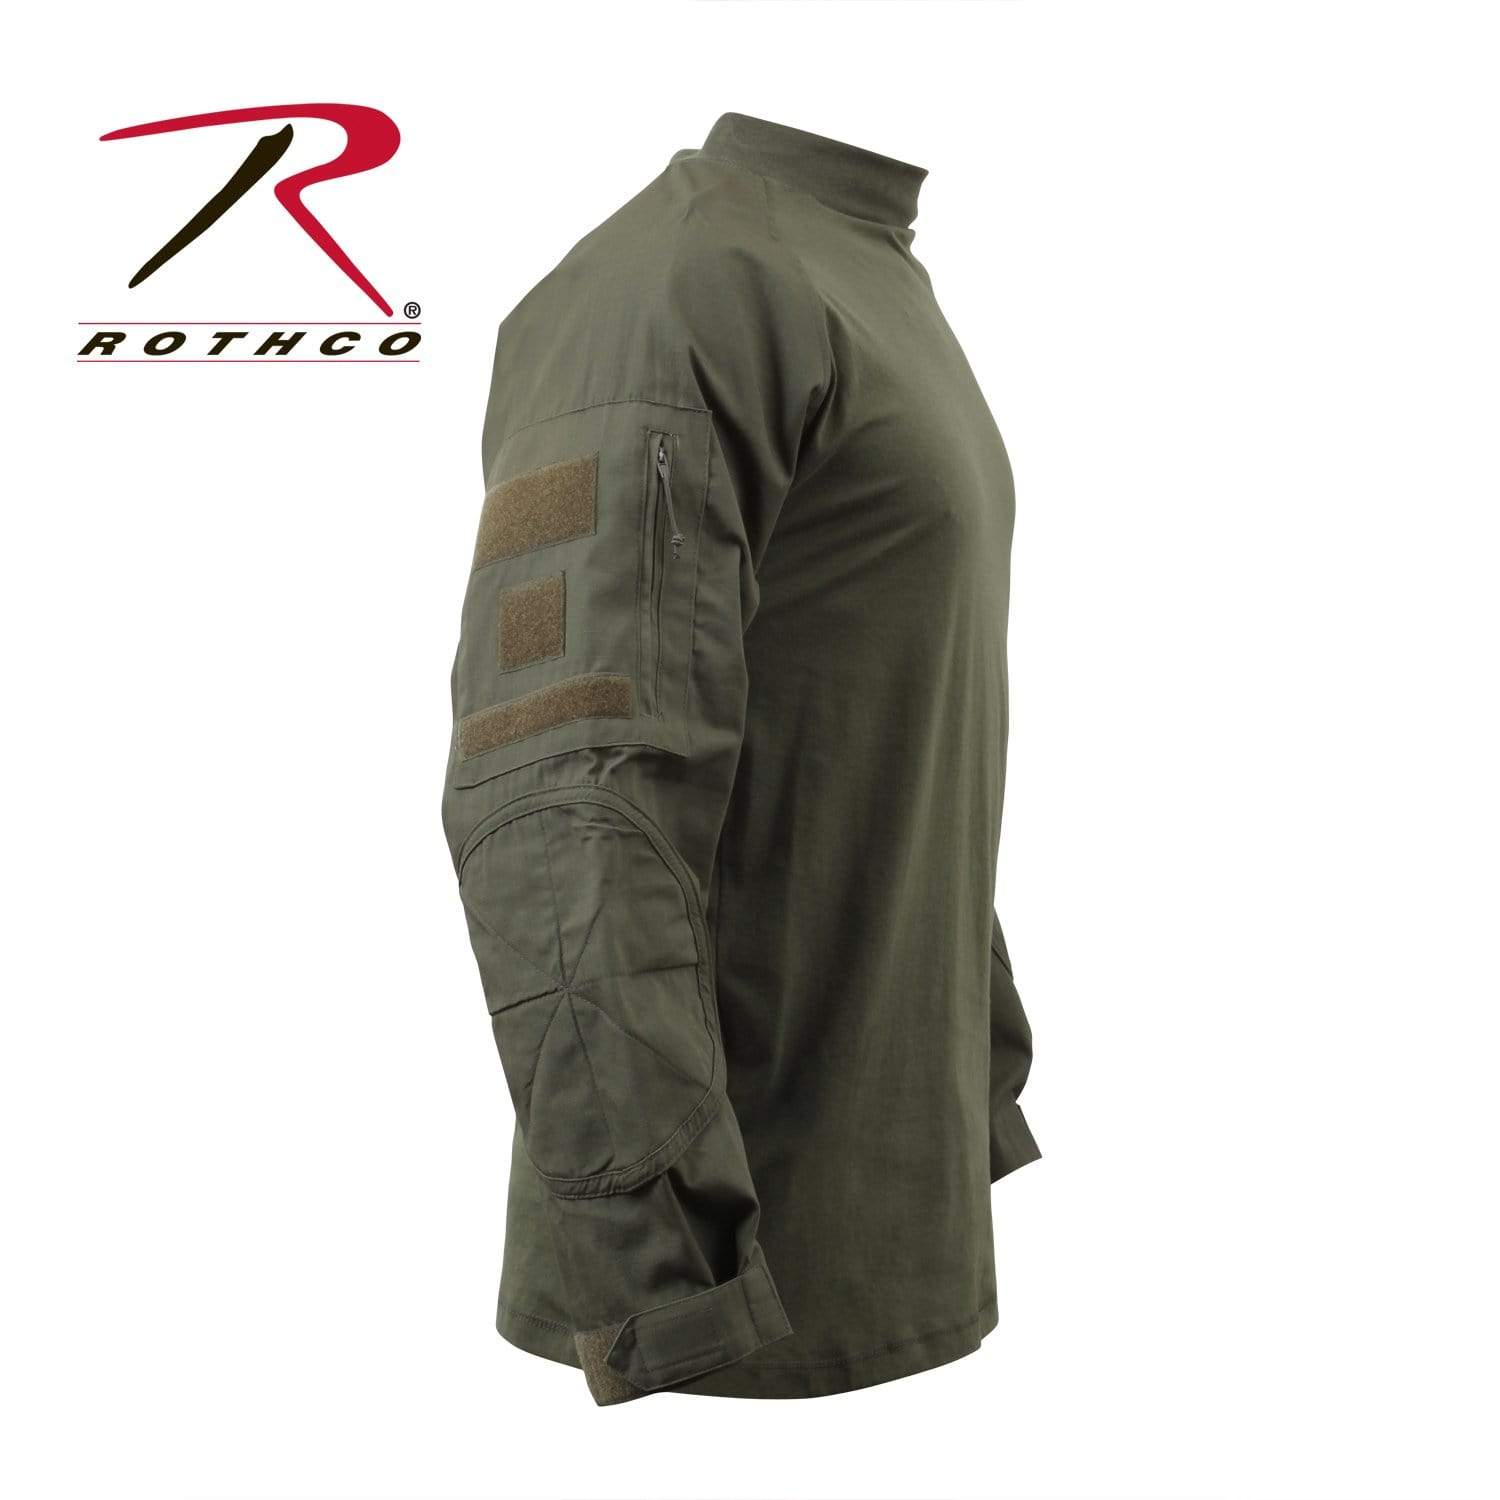 Rothco Military Combat Shirt- Olive Drab - Eminent Paintball And Airsoft